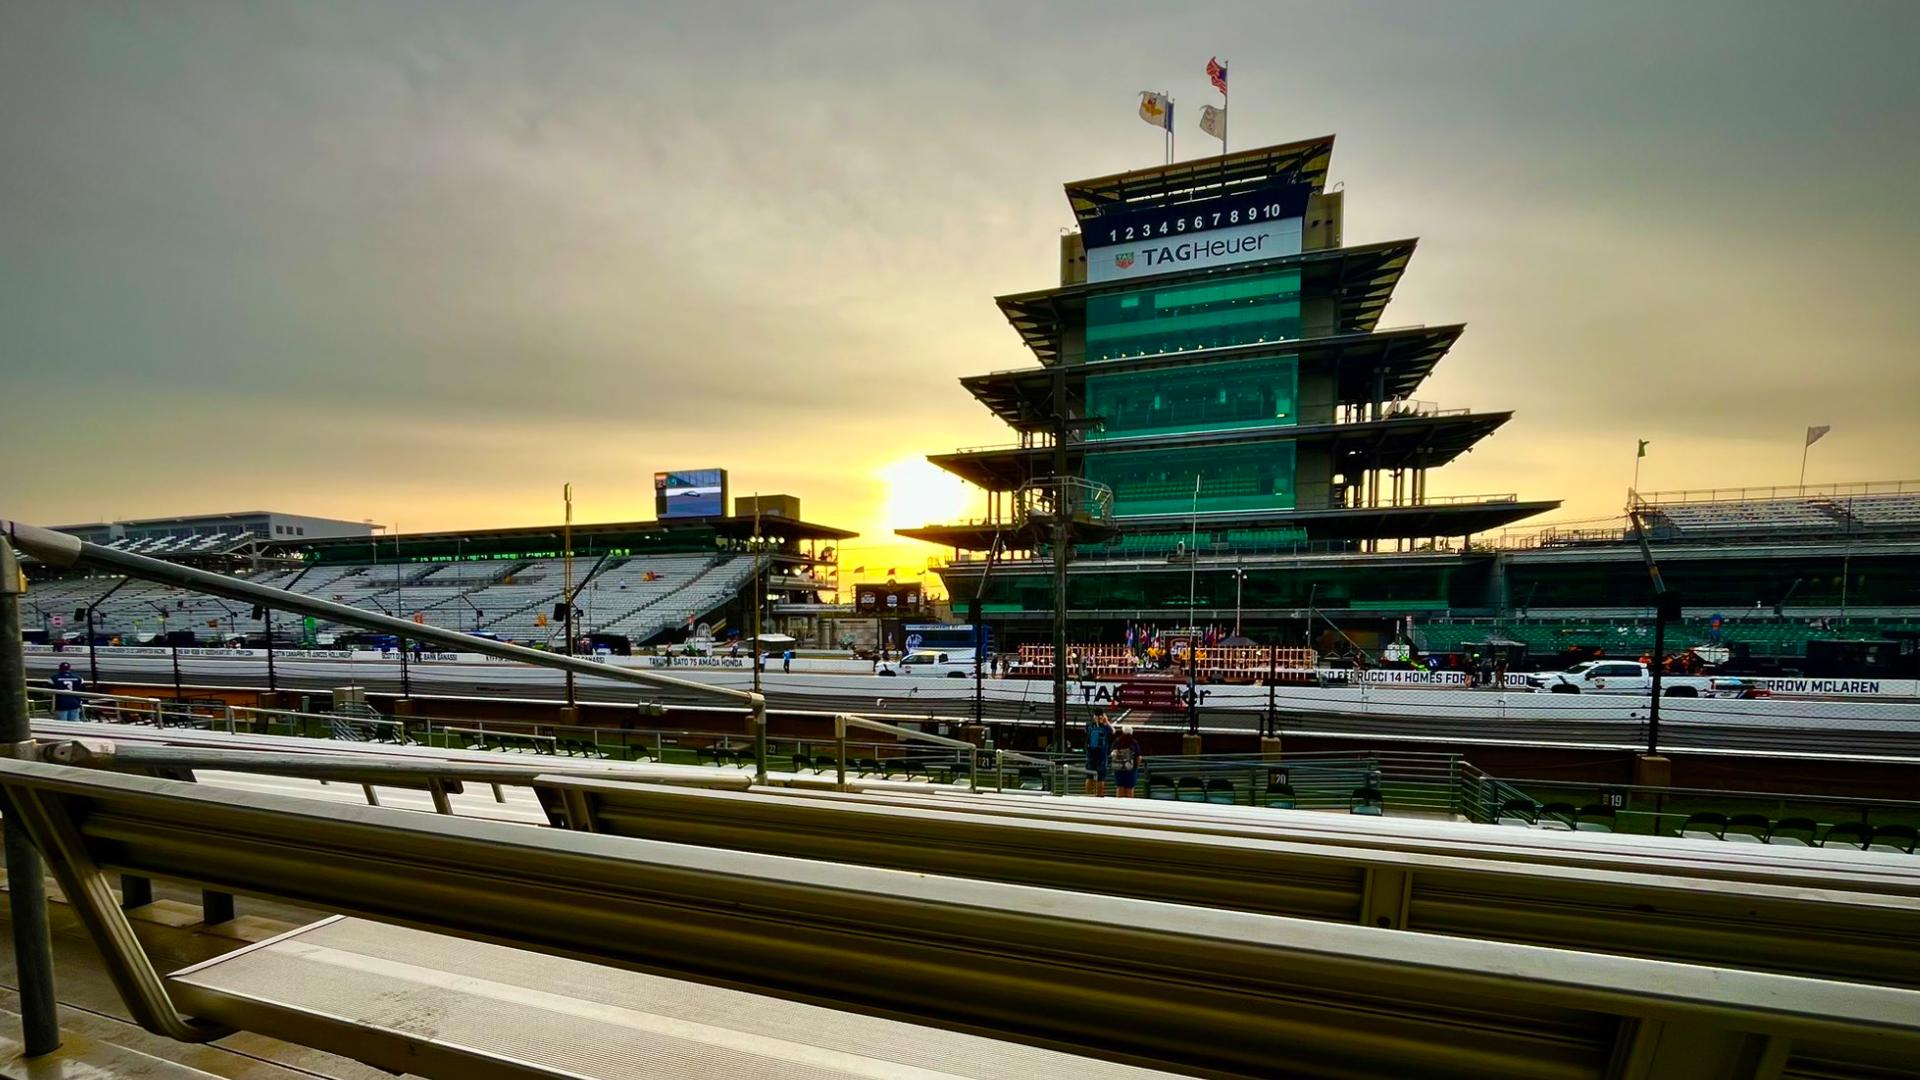 Doug Boles joins 13News to go over IMS' plan for the possibility of severe weather and how they will inform fans at the track.